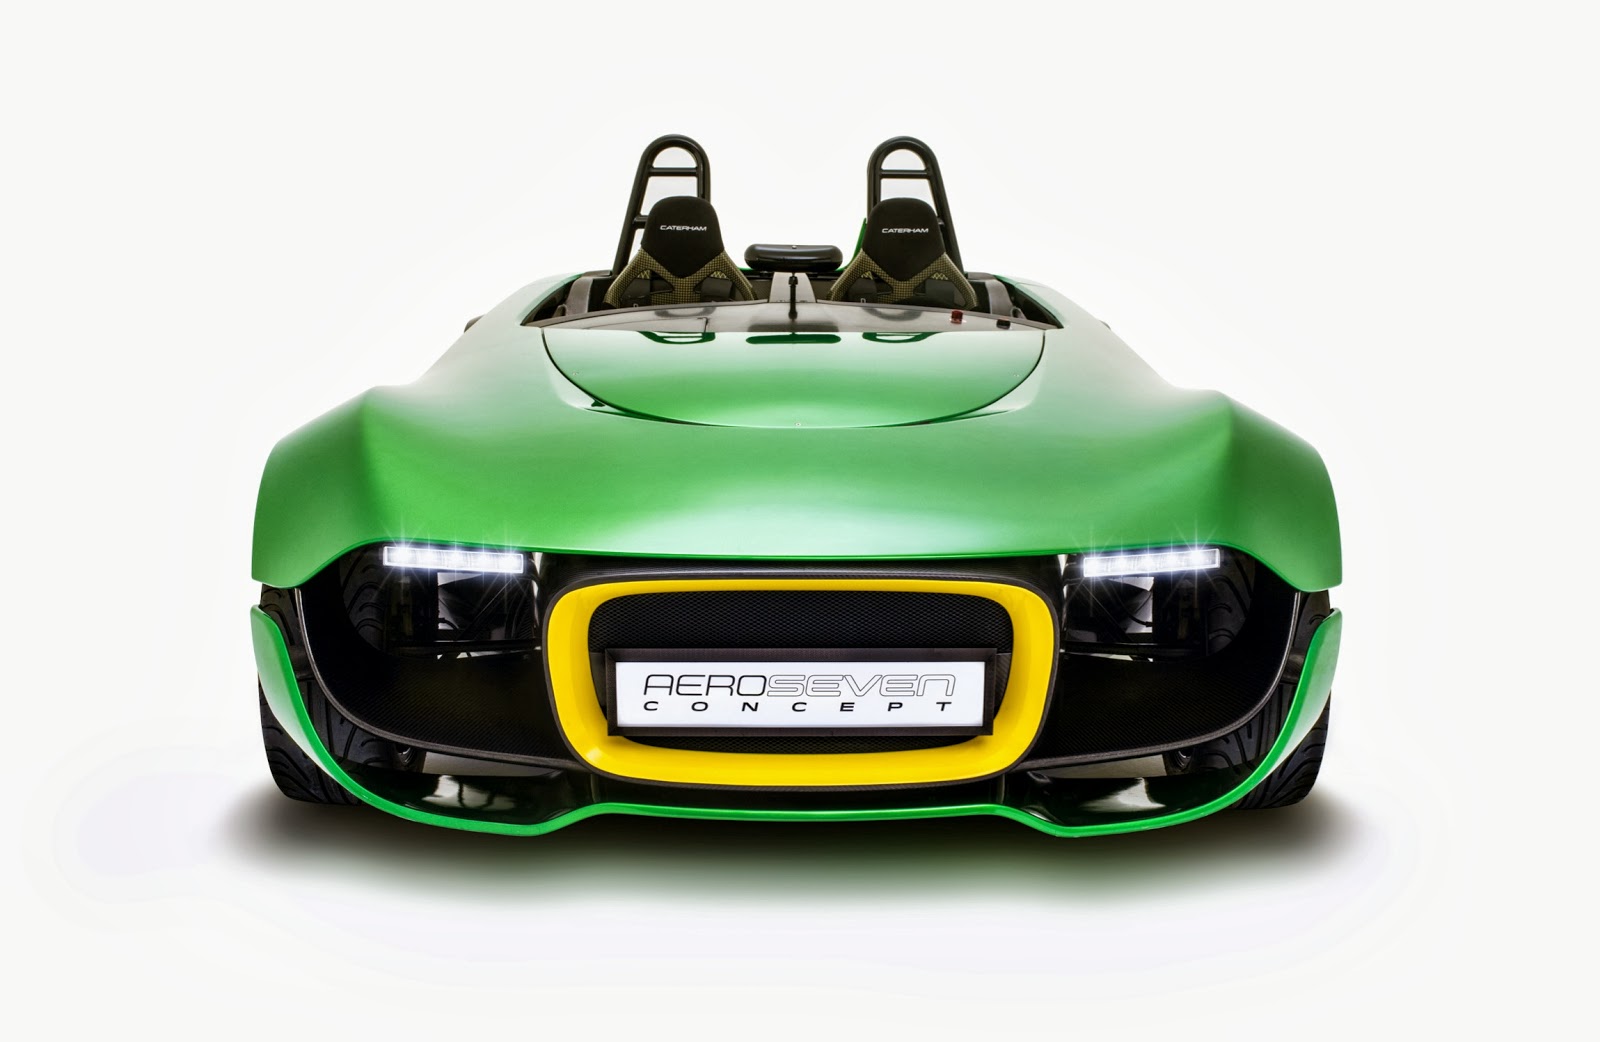 ... toy), but we do know quite a bit about the Caterham AeroSeven Concept